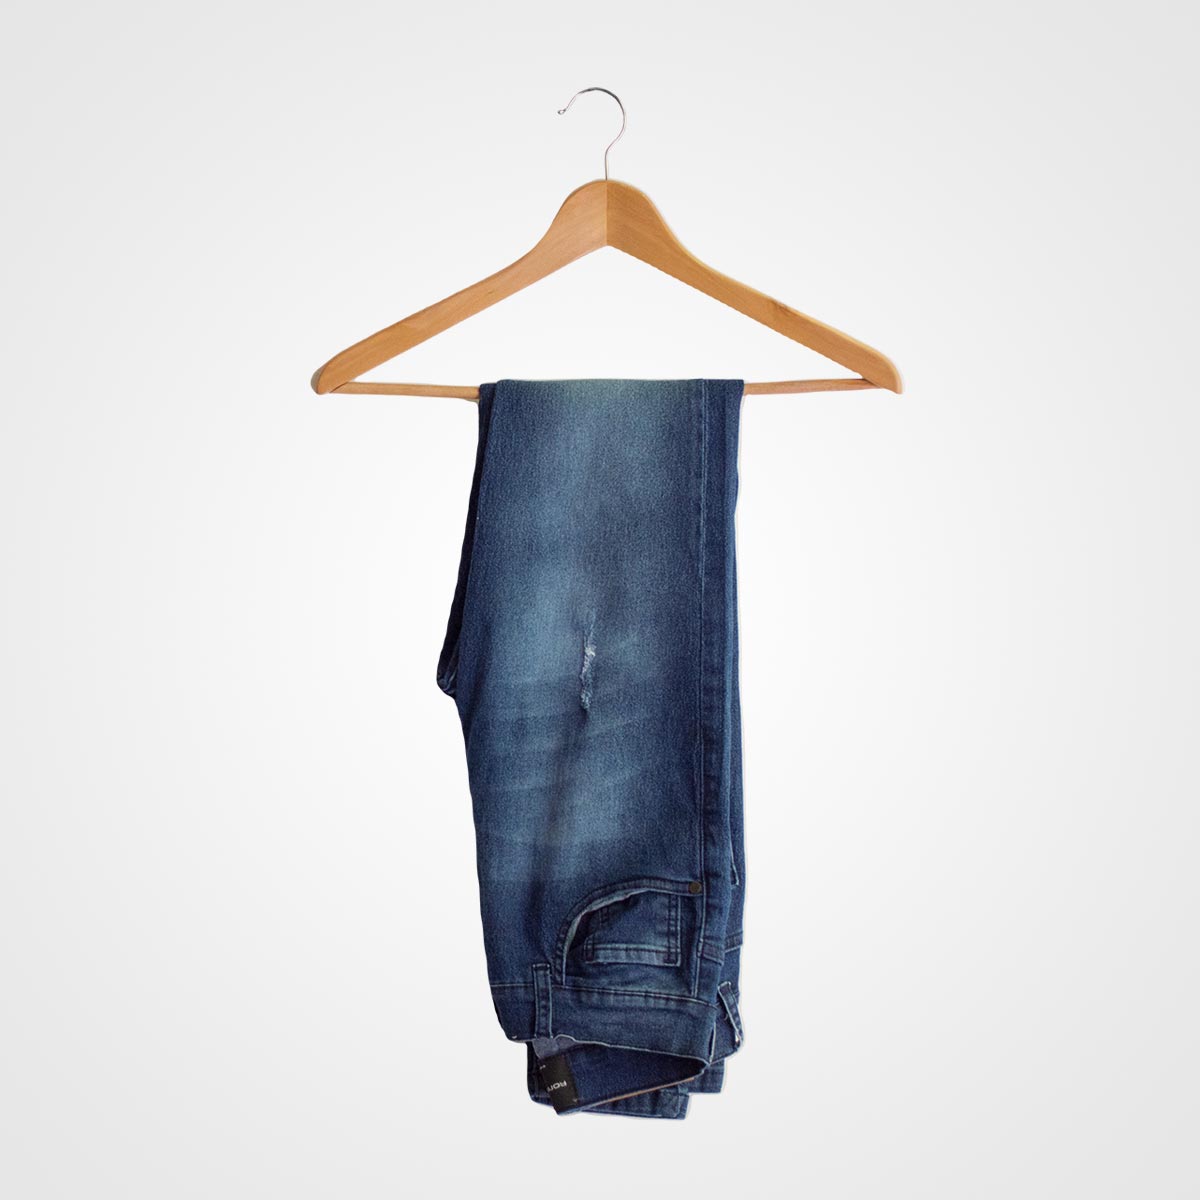 product-m-jeans2.jpg